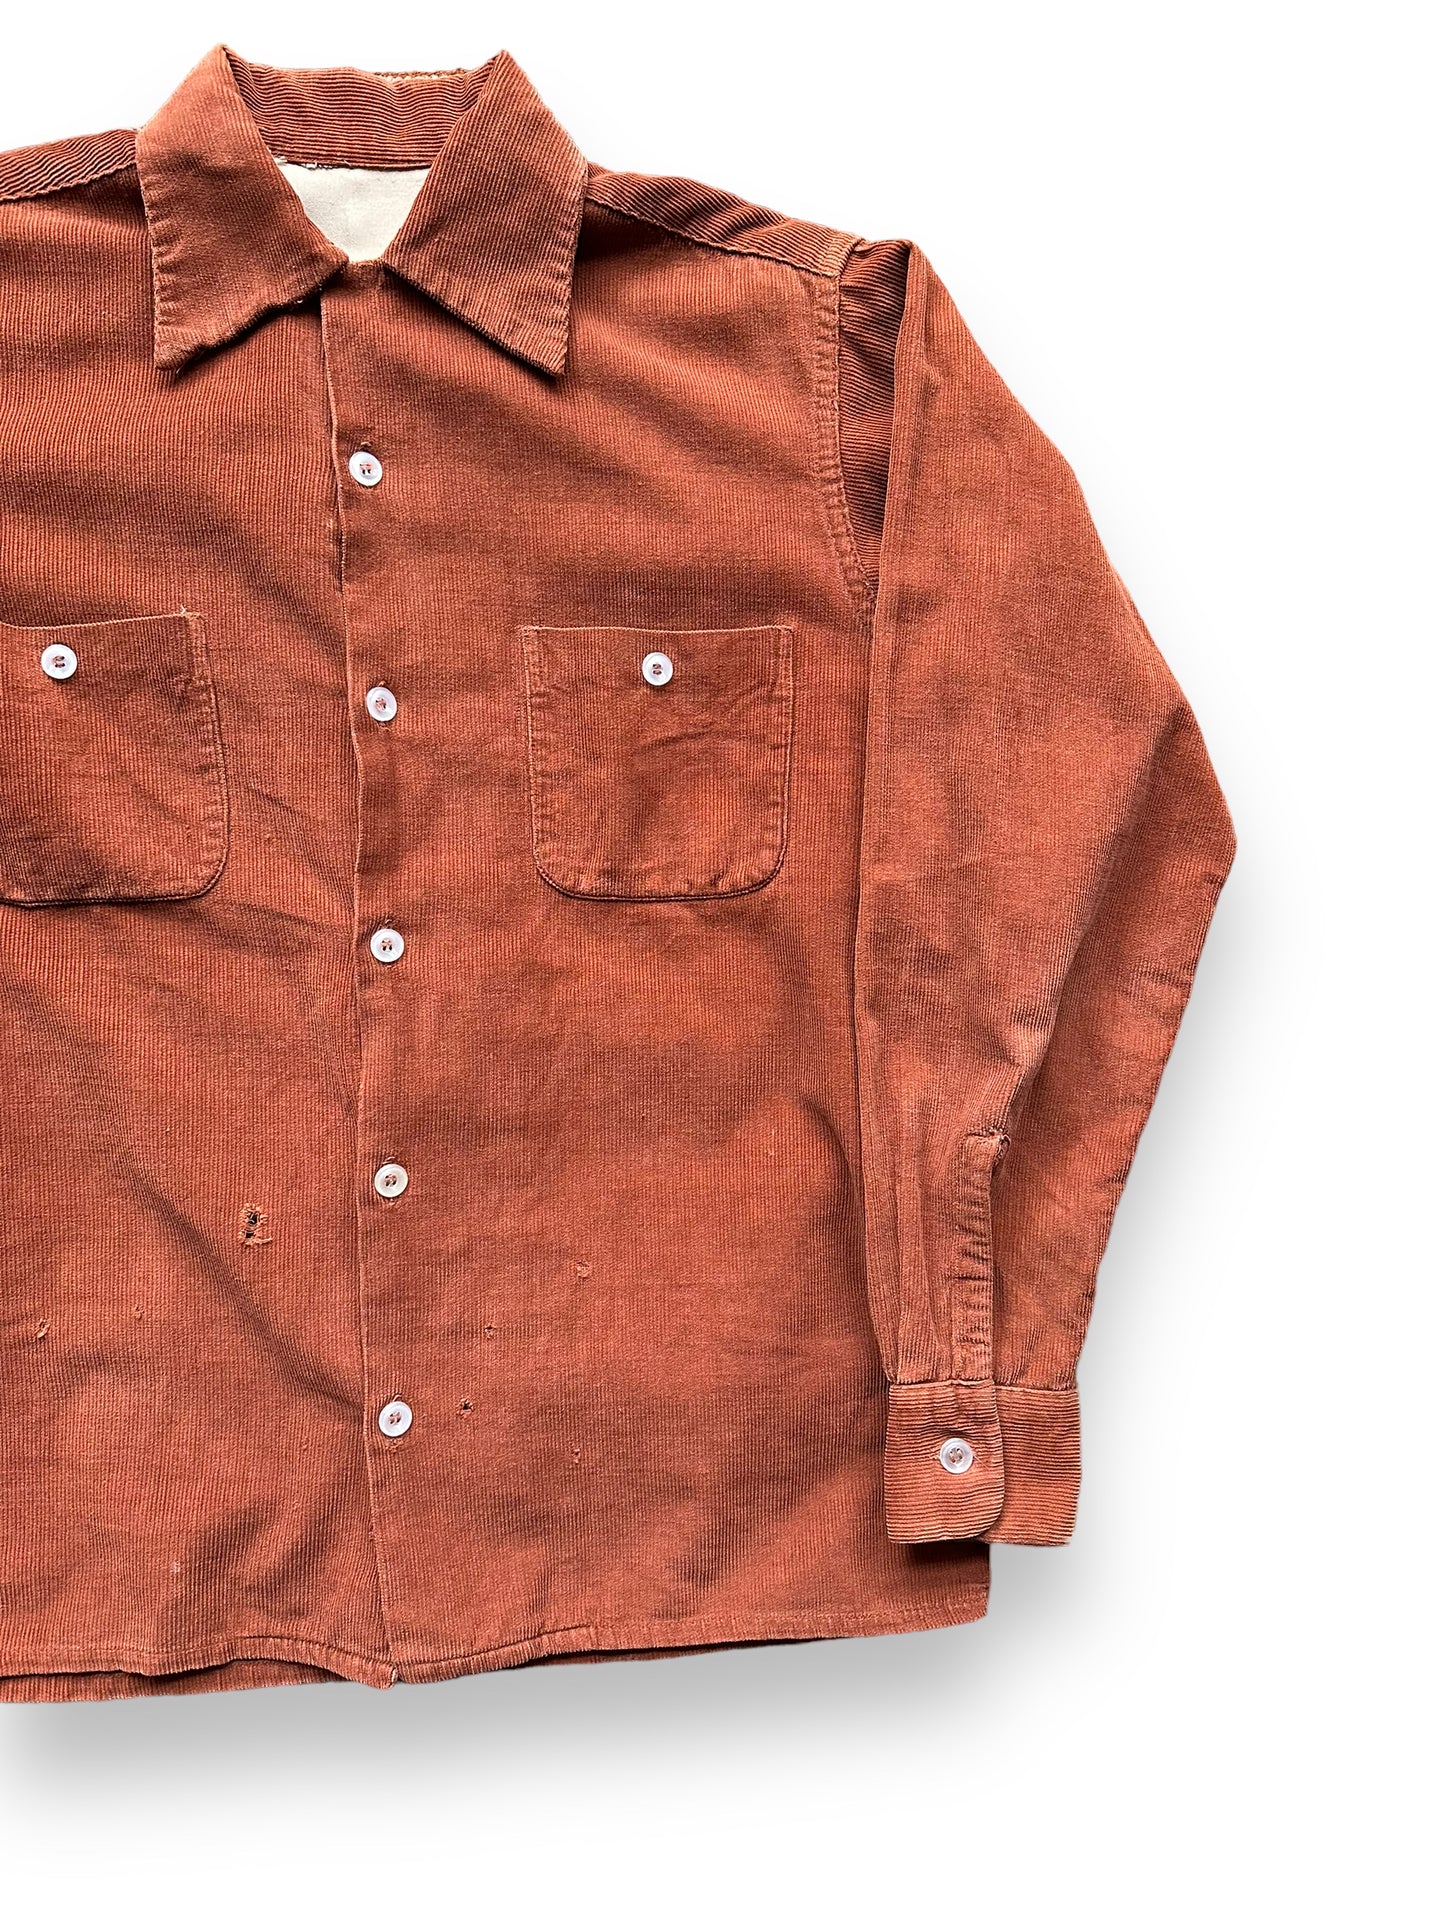 Front Left View of Vintage Rust Colored Corduroy Loop Collar Shirt  SZ M | Vintage Loop Collar Shirt Seattle | Barn Owl Vintage Seattle